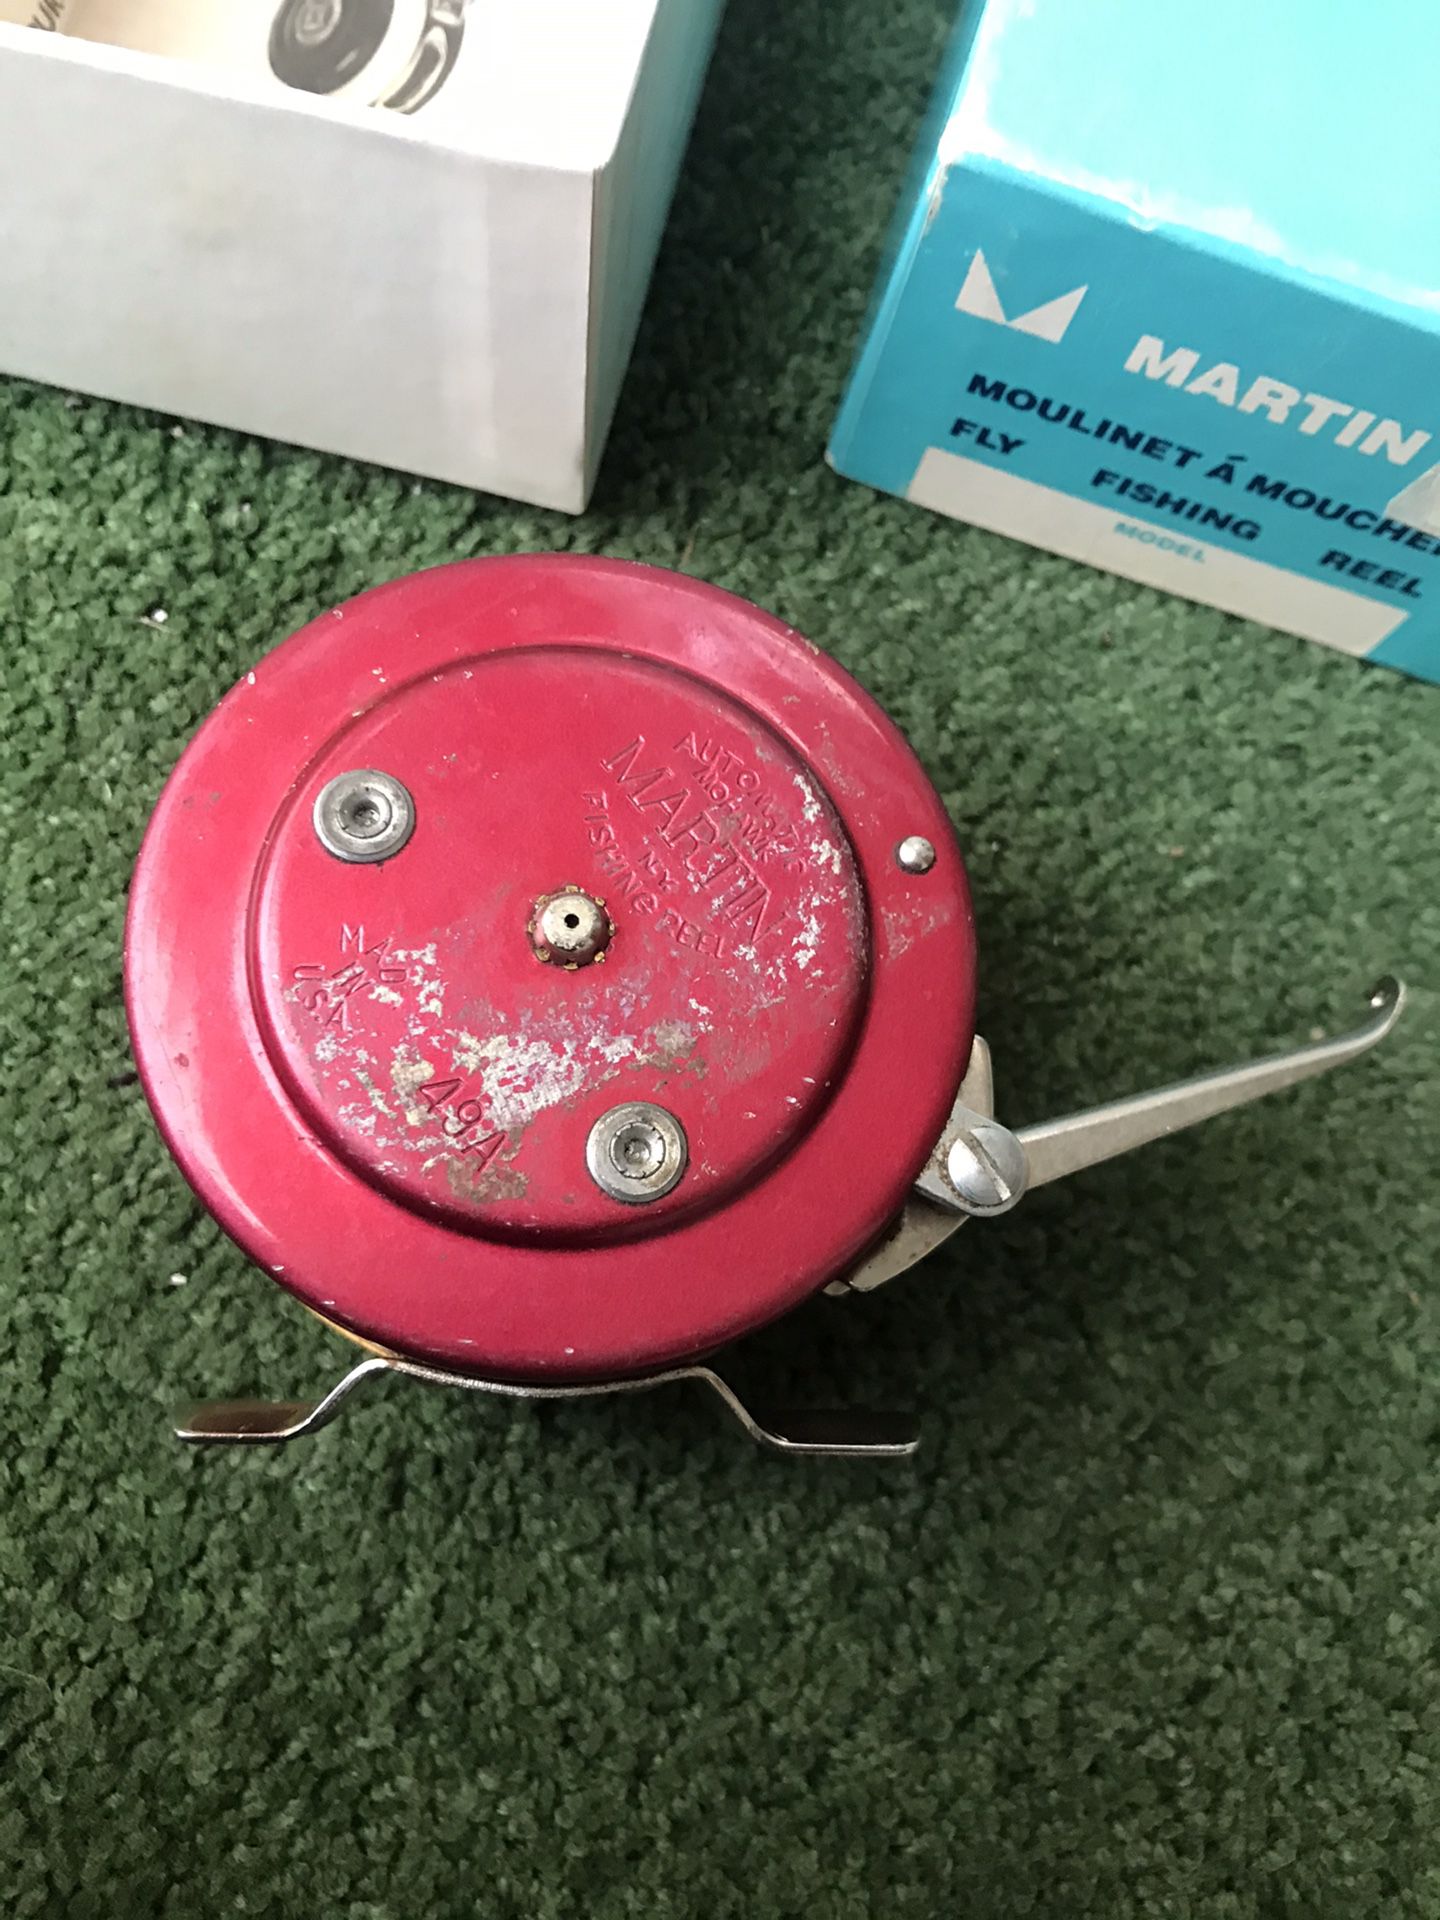 Vintage Martin Fly Fishing Reel With Box for Sale in Chula Vista